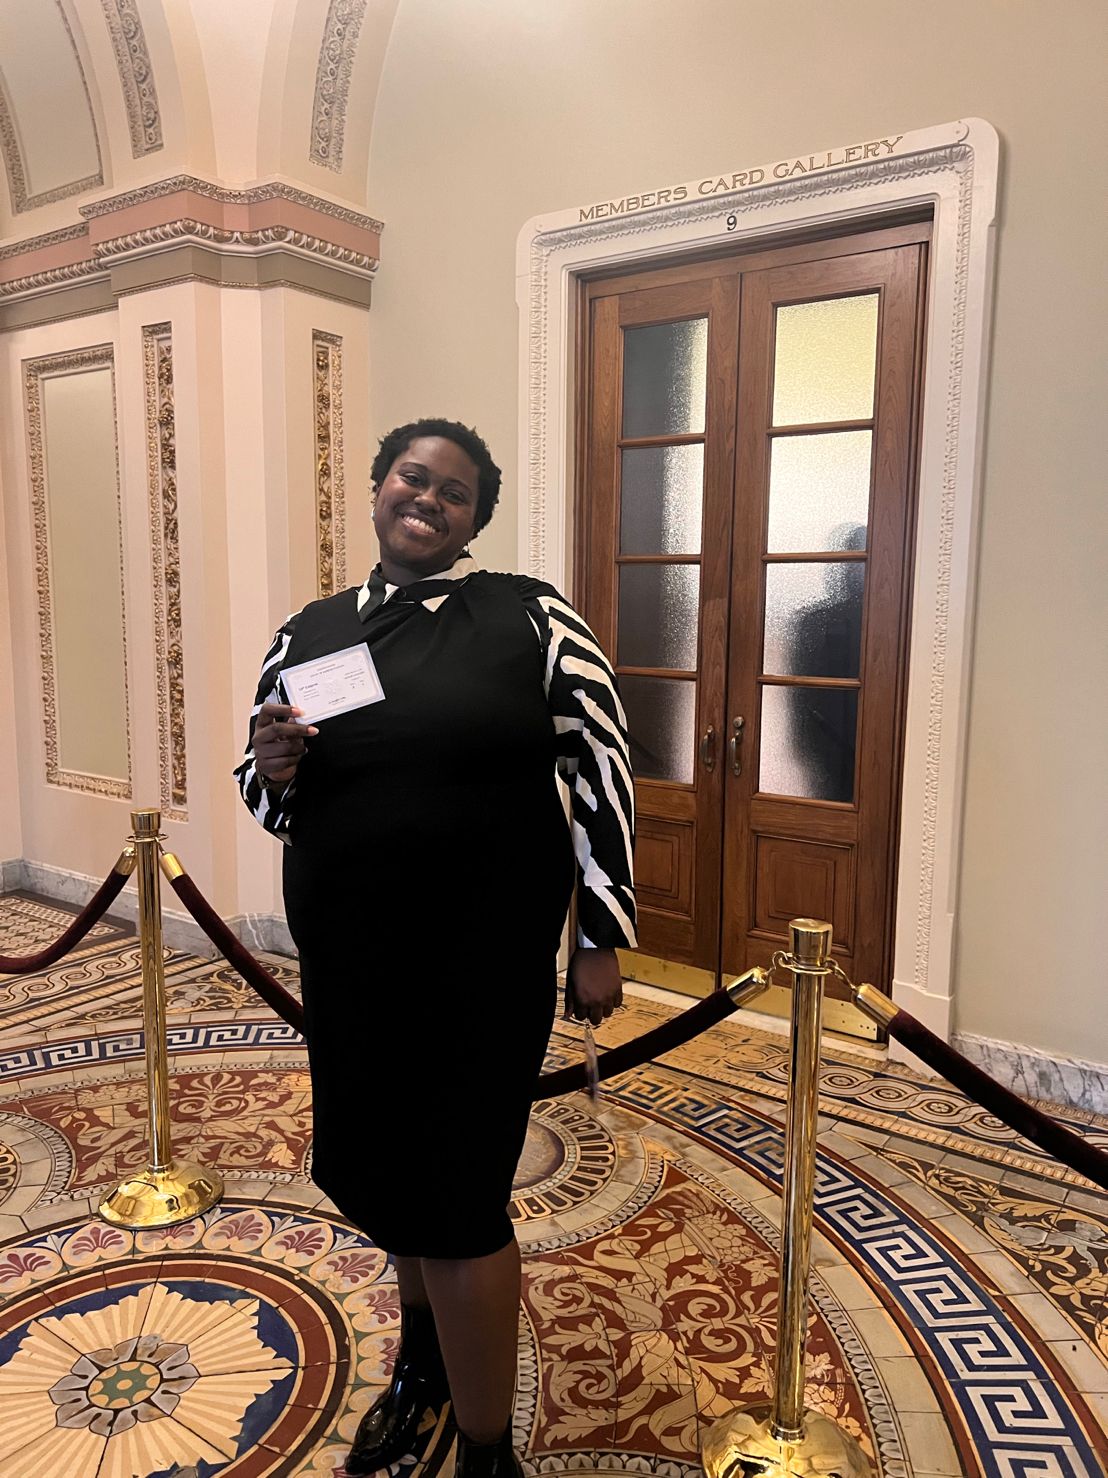 Healthcare fellow stands inside the U.S. Capitol building